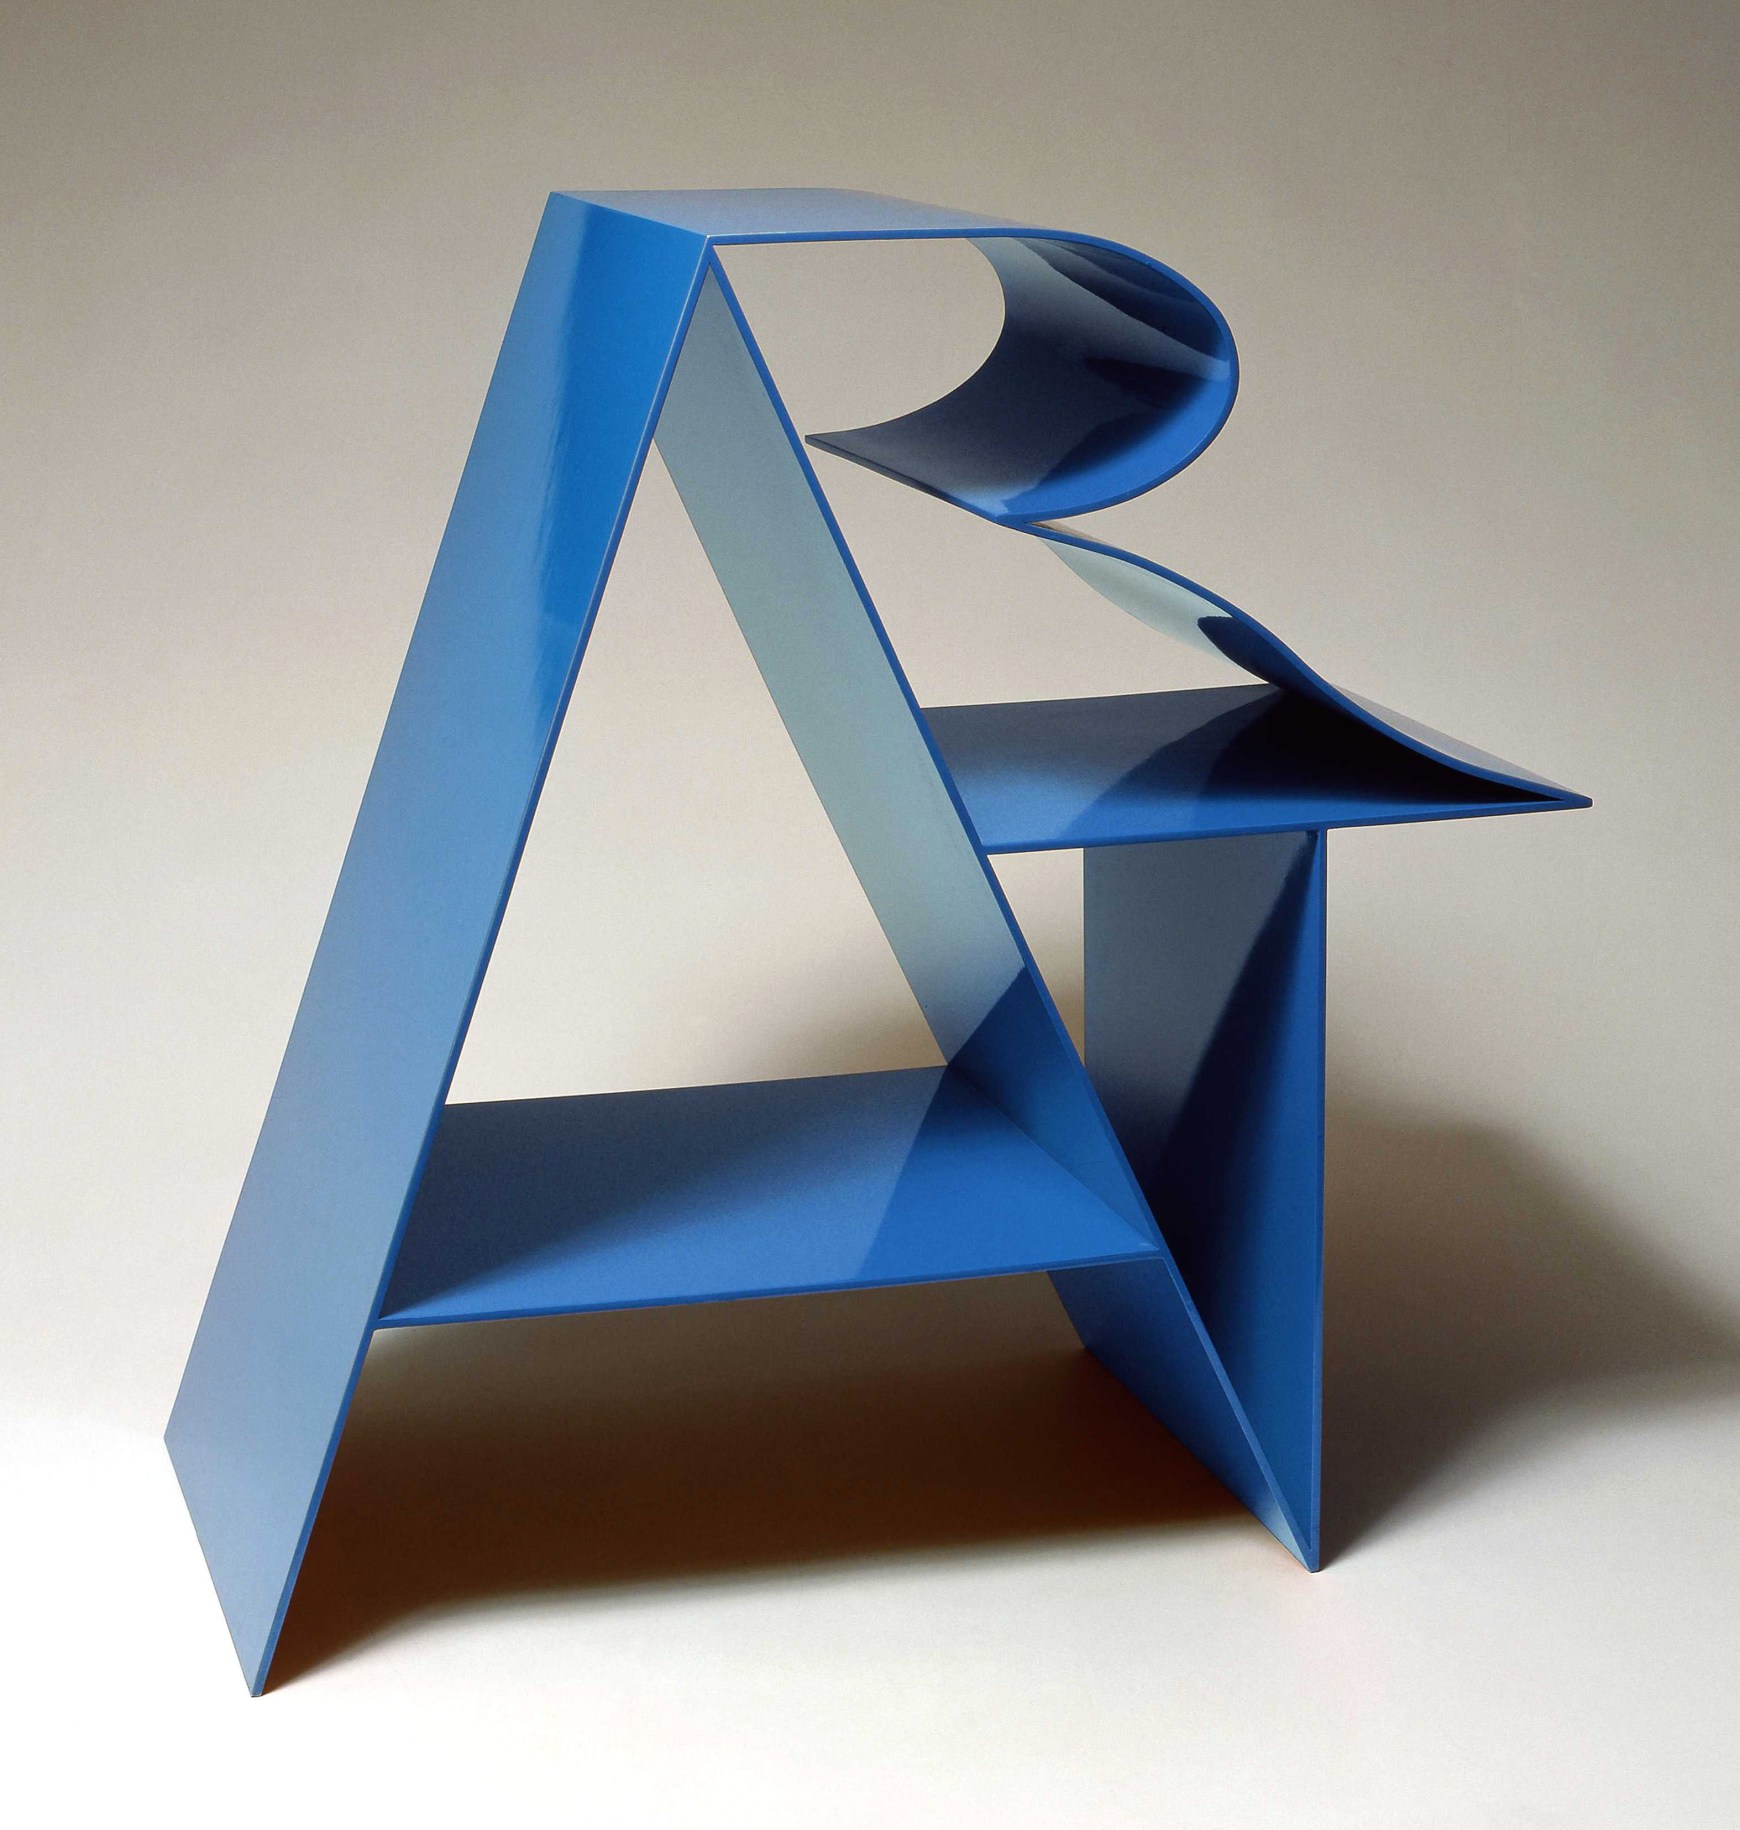 Art, an 18 by 18 by 9 inch blue polychrome aluminum sculpture. The letter &quot;A&rdquo; forms a supporting structure that the &ldquo;R&rdquo; and &ldquo;T&rdquo; lean against.